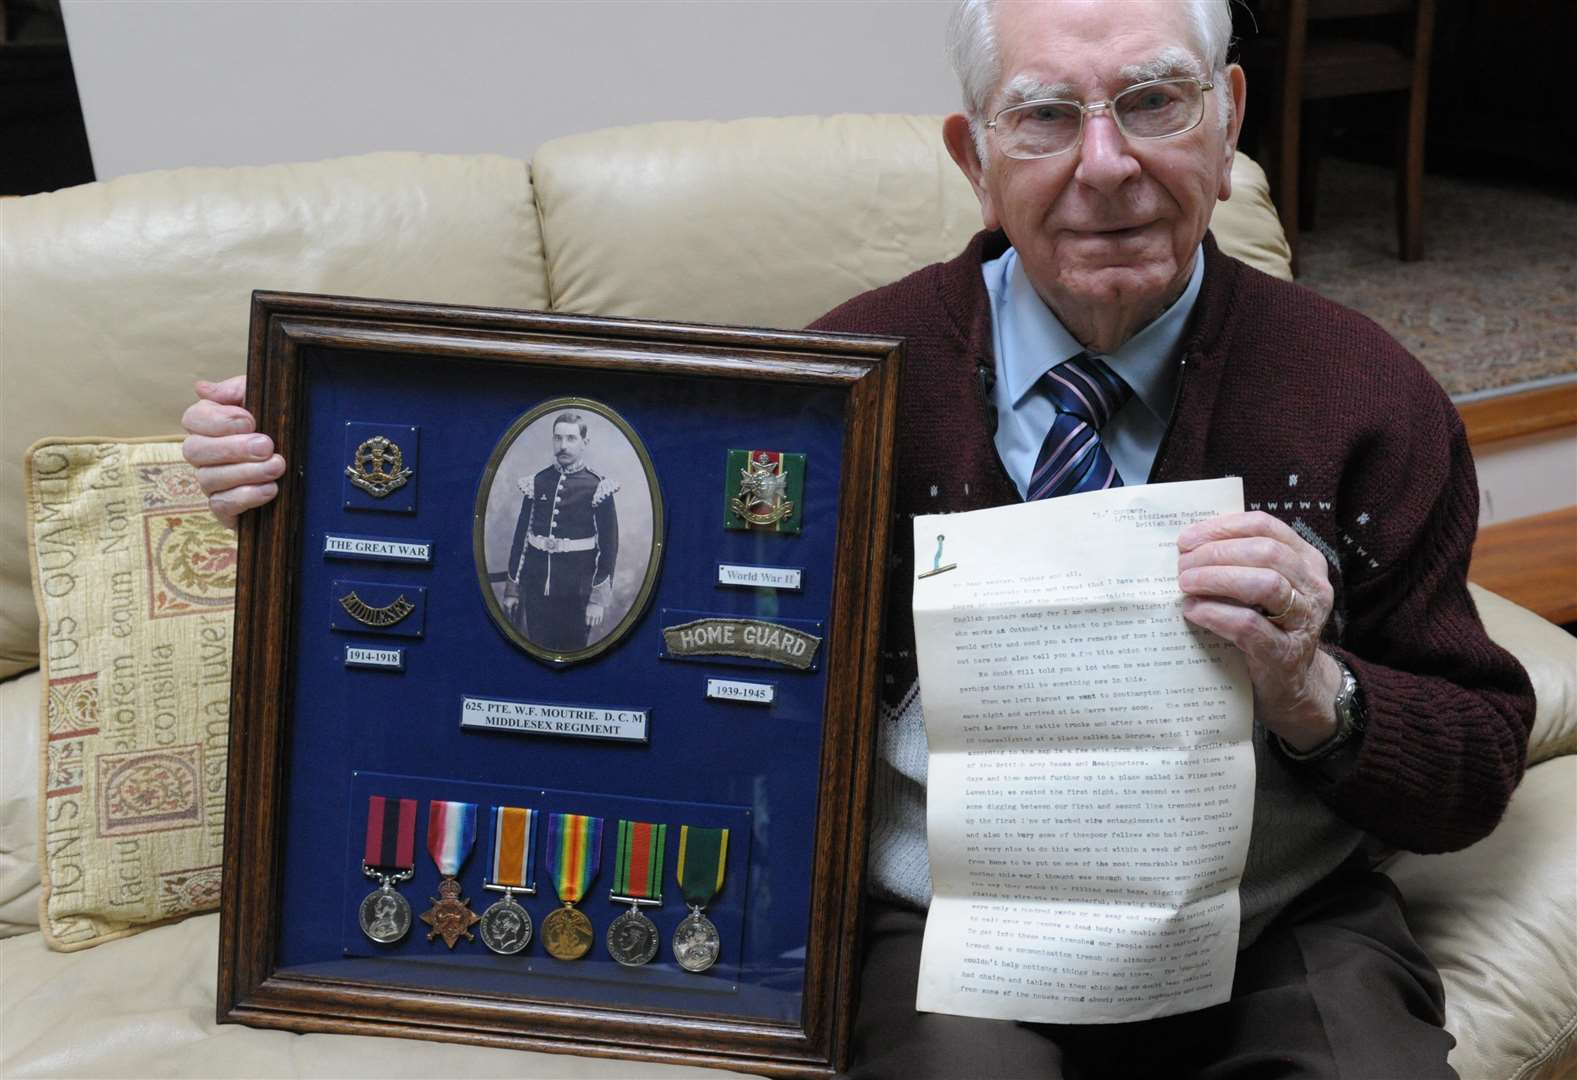 Douglas Moultrie with pictures and letters/medals from his father